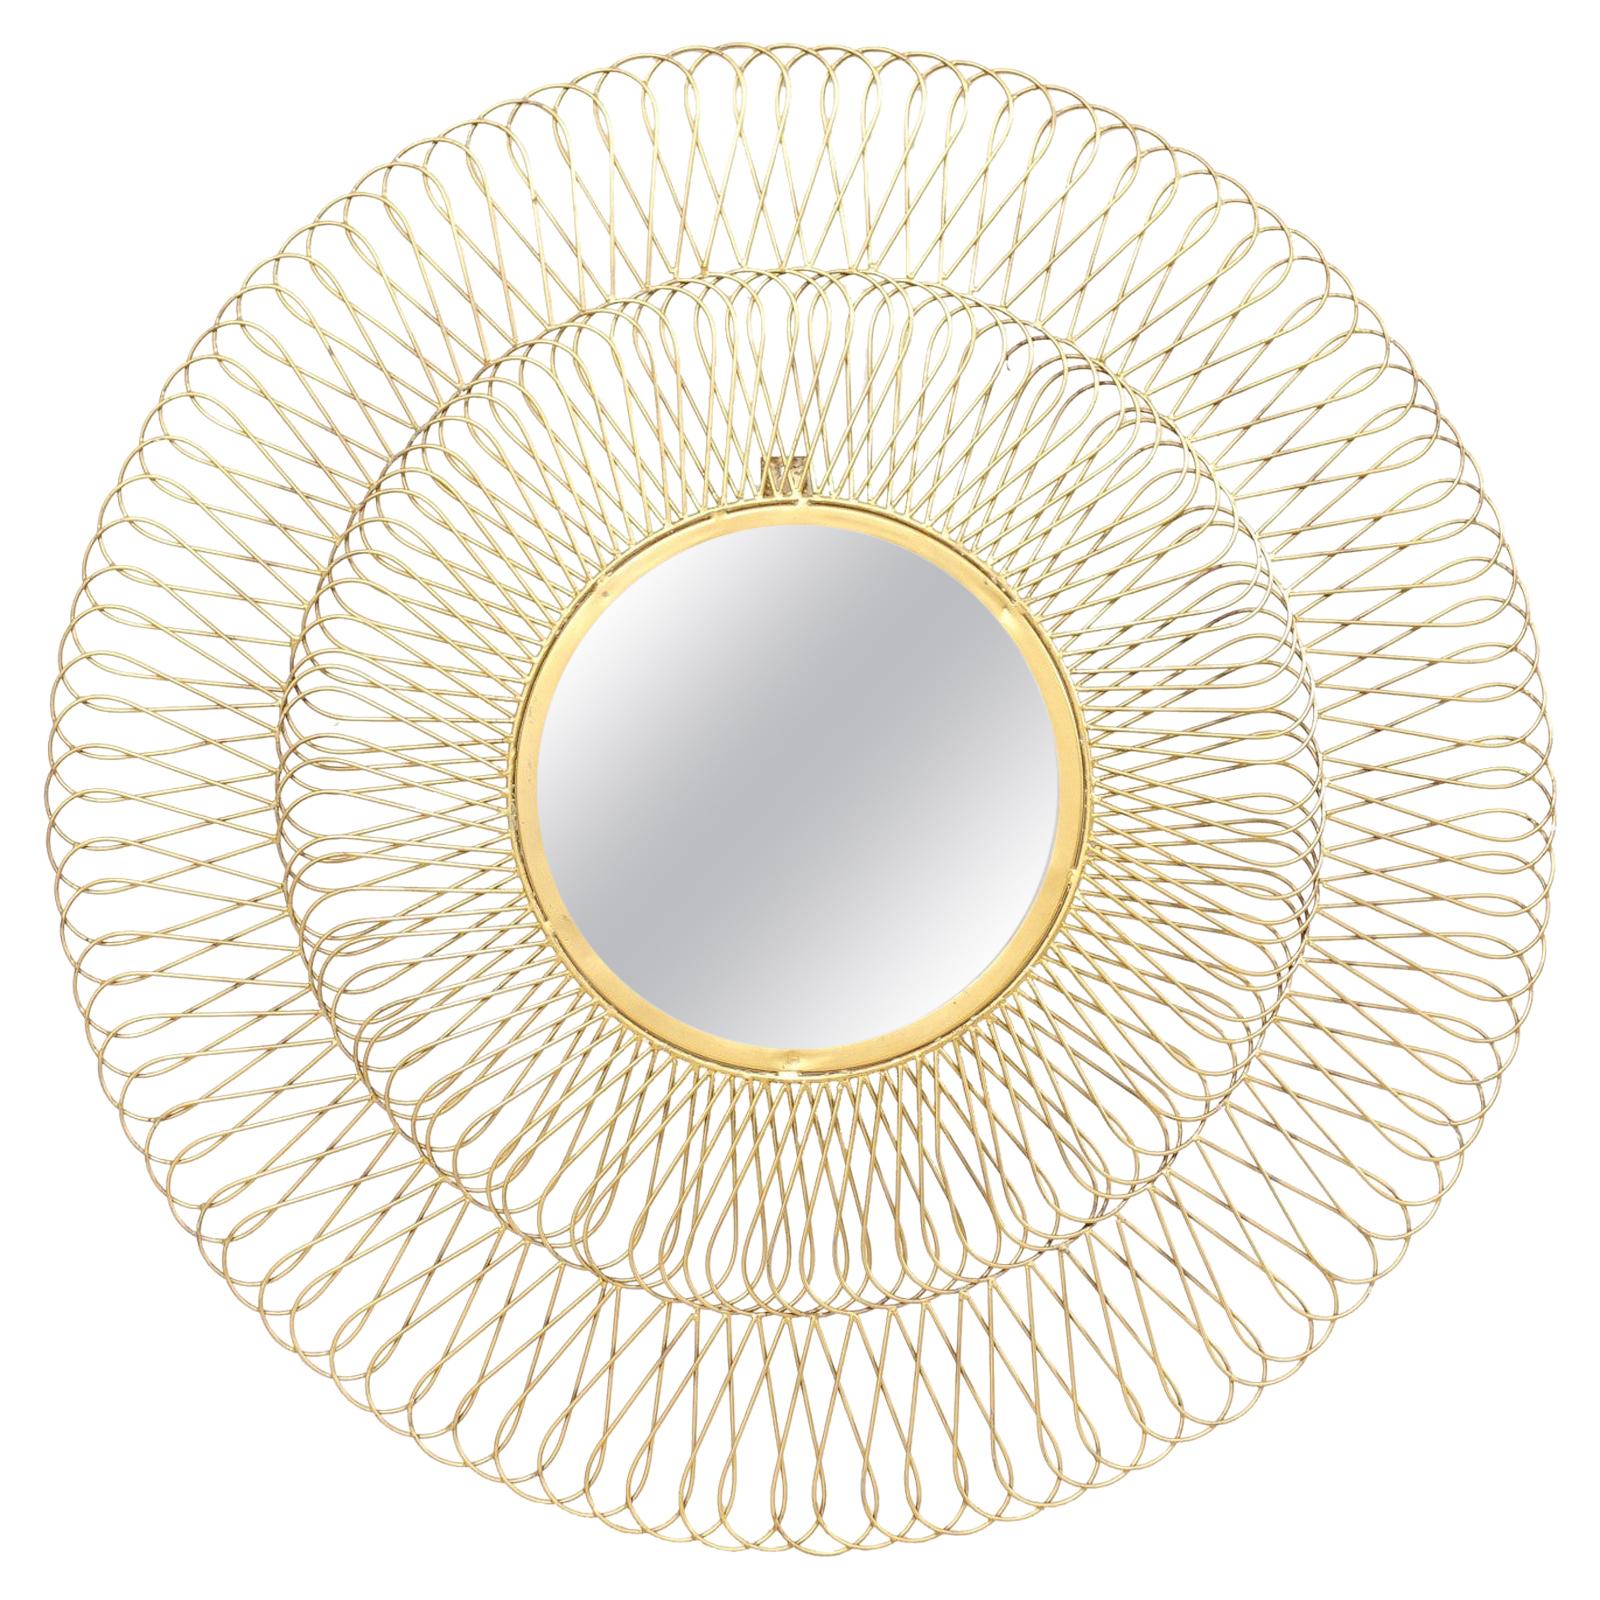 Spanish Round-Shaped Brass Mirror with Open Intertwining Loop Surround For Sale